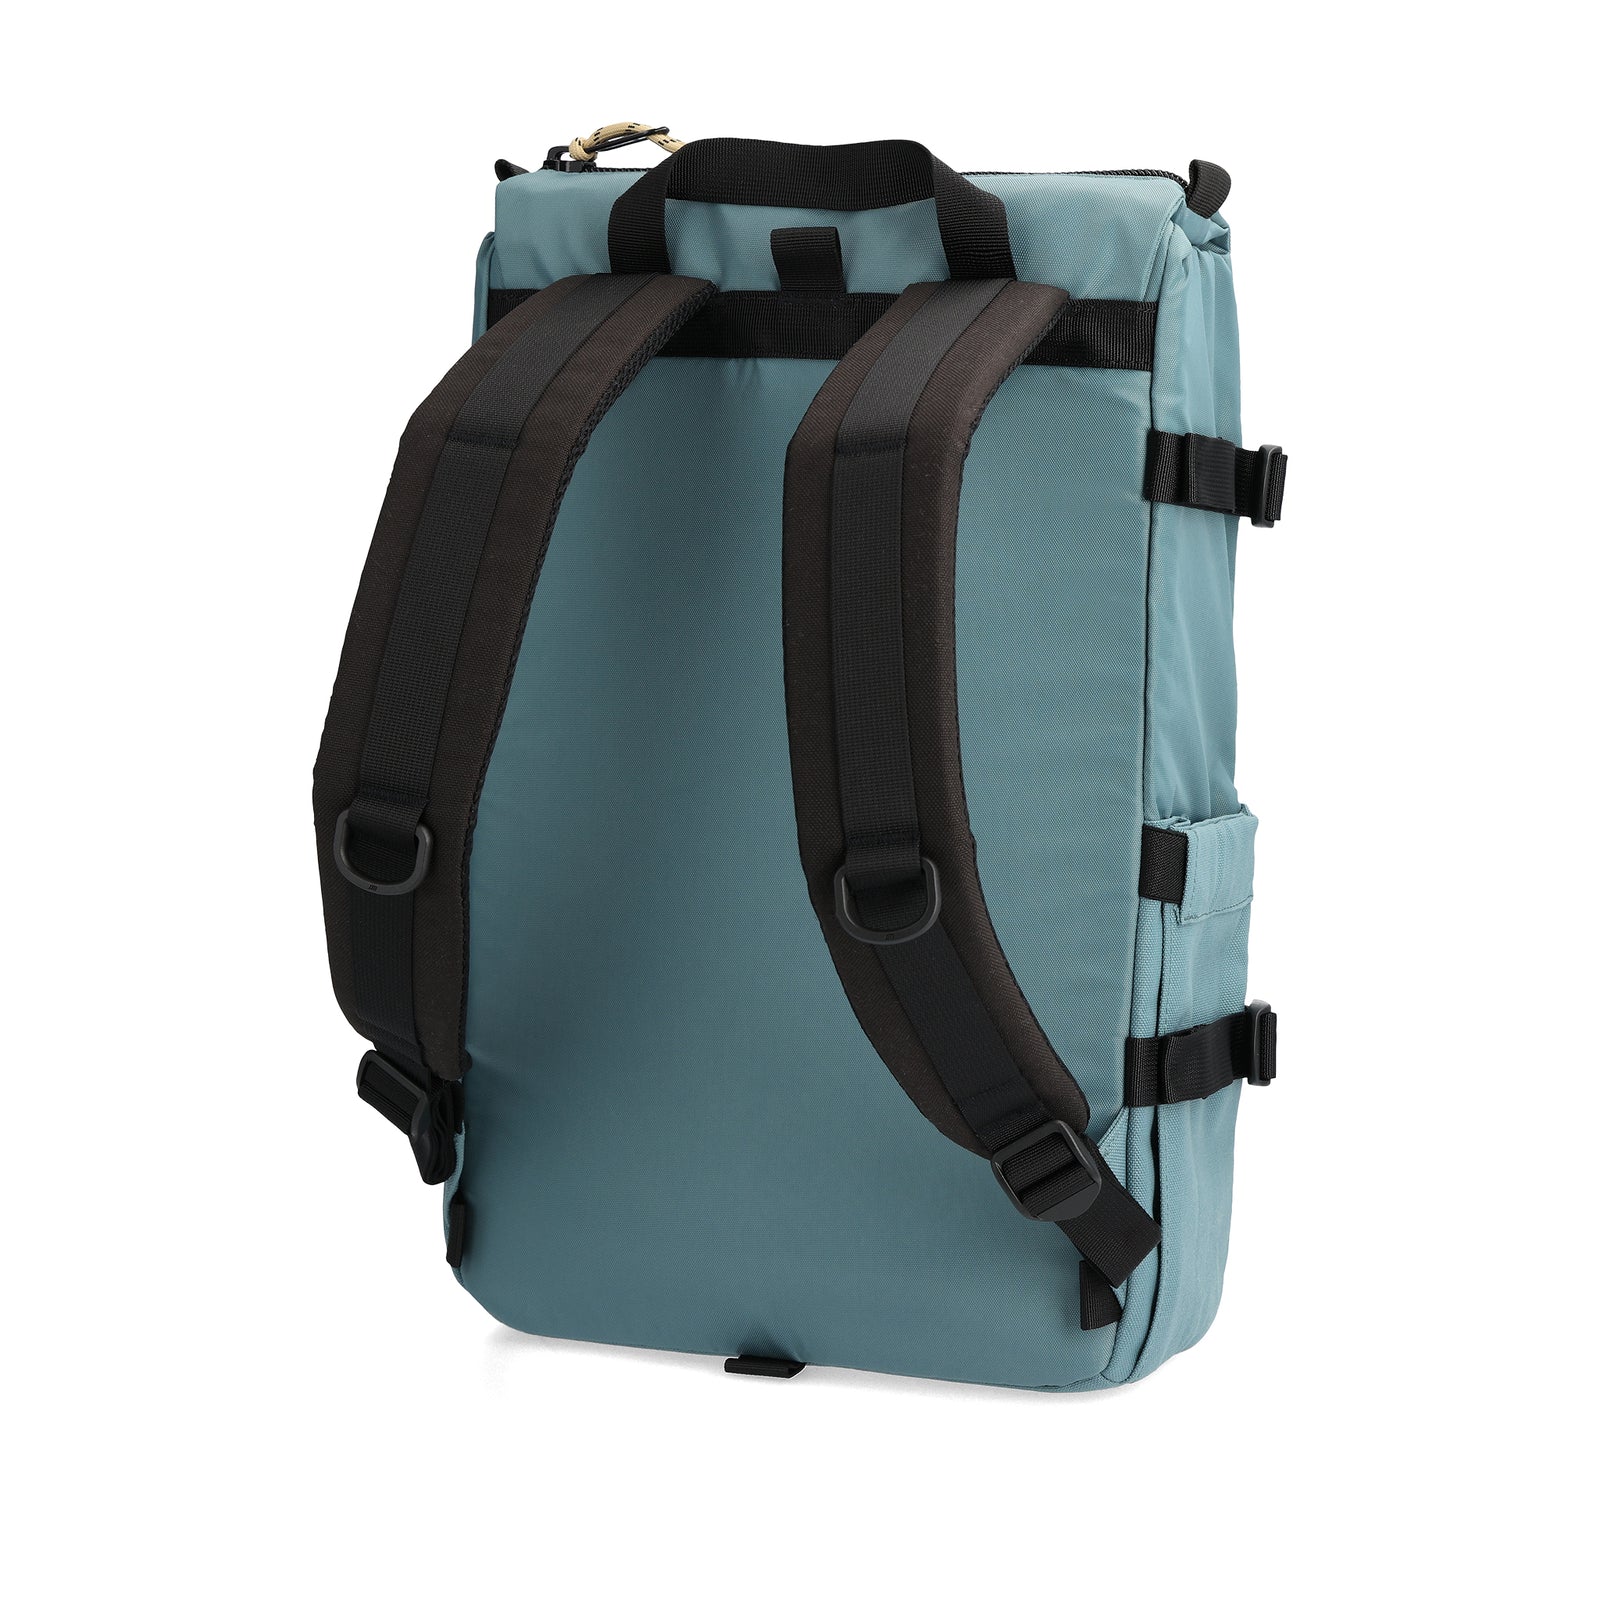 Back View of Topo Designs Rover Pack Classic in "Sea Pine"